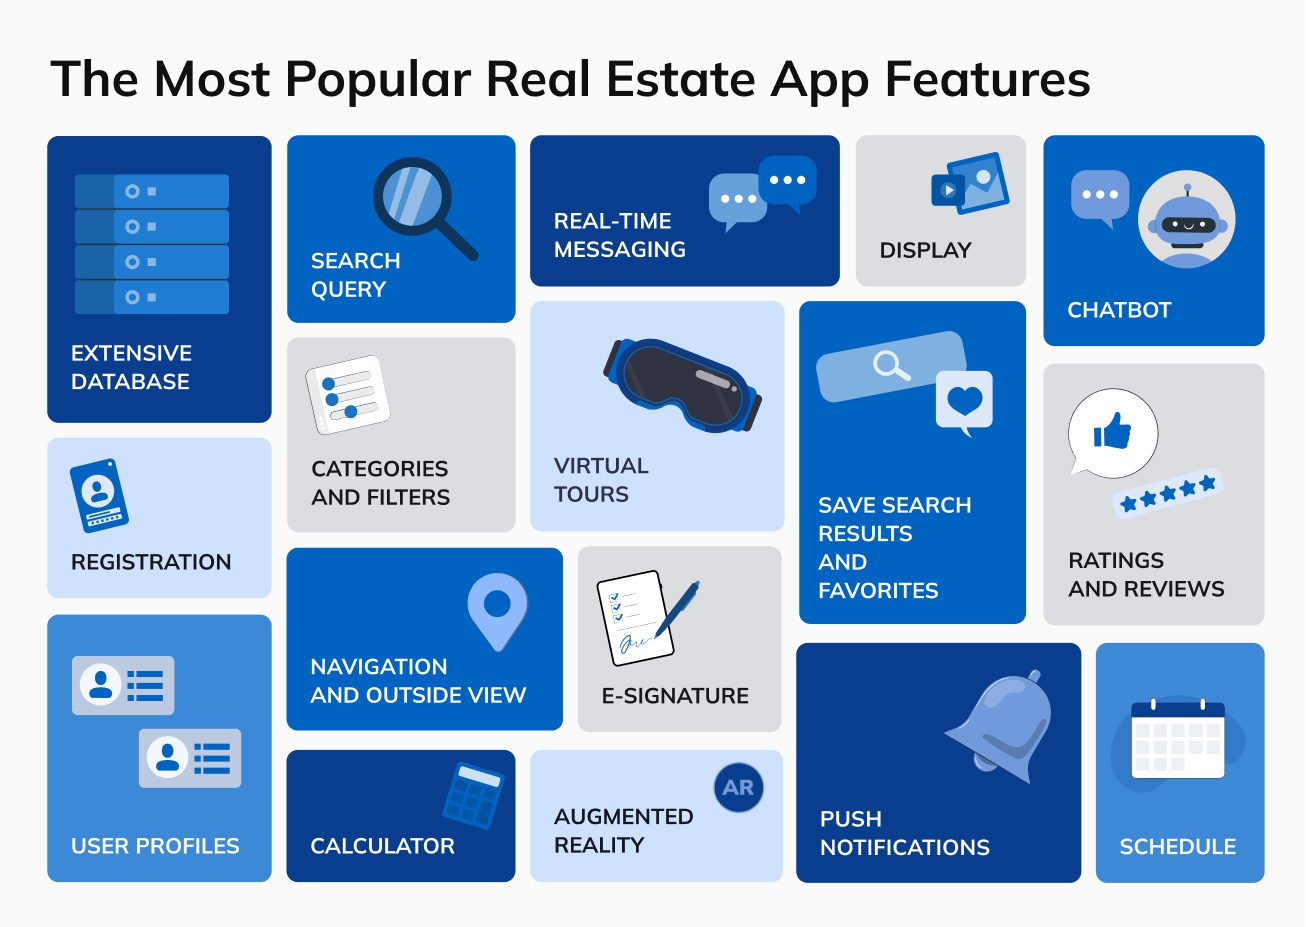 The Most Popular Real Estate App Features